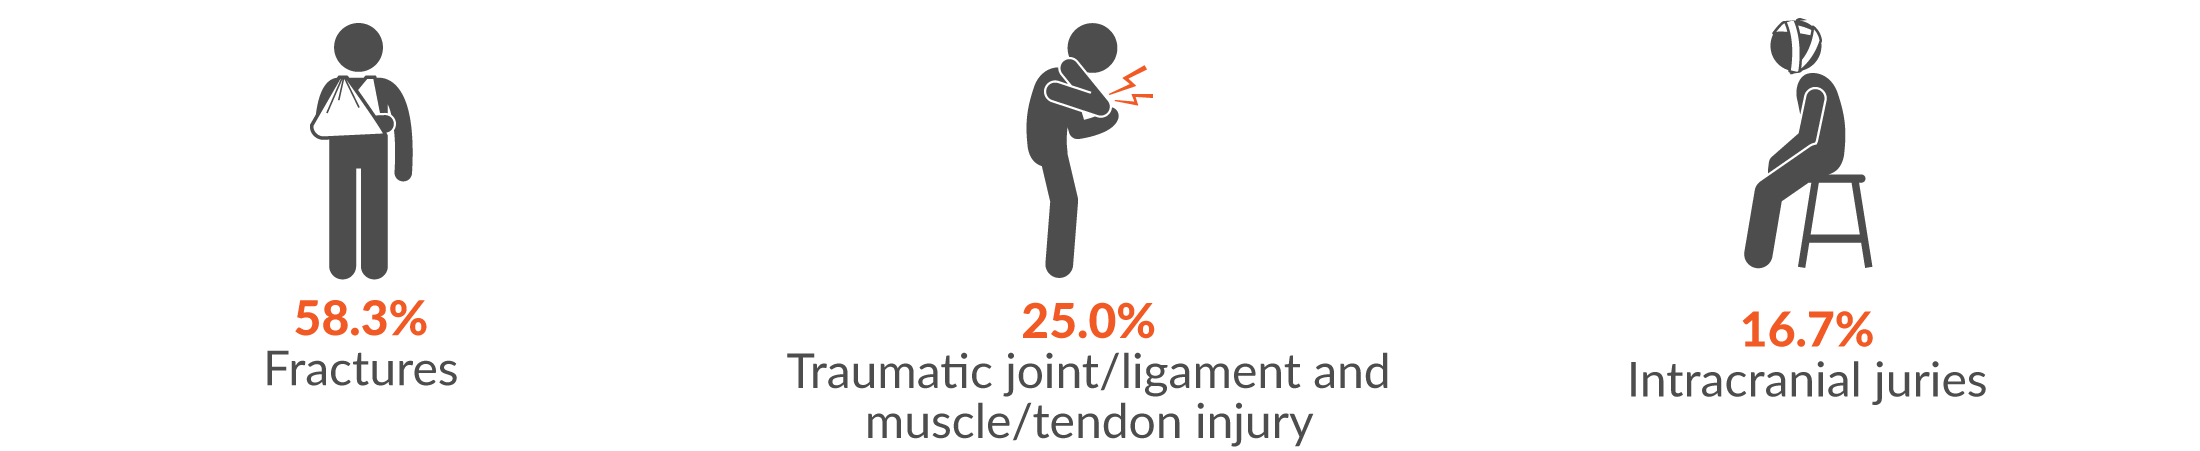 58.3% fractures; 25.0% traumatic joint/ligament and muscle/tendon injury and 16.7% intercranial injuries.